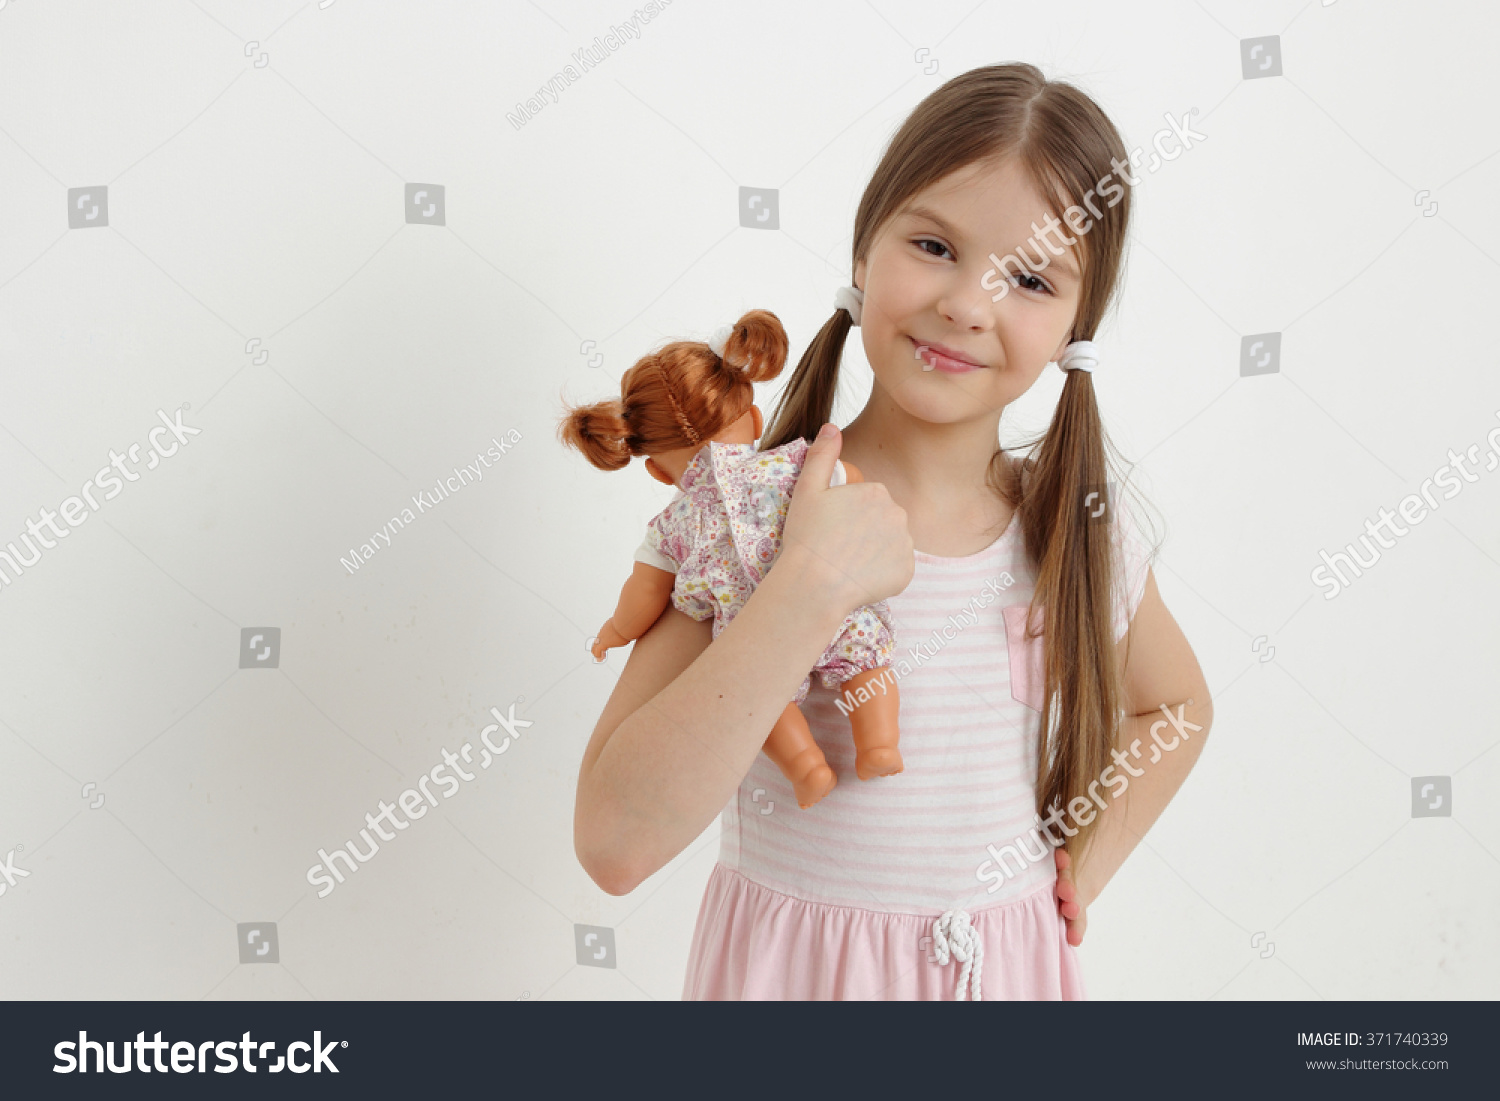 Little Girl Playing With Baby Doll Stock Photography ...